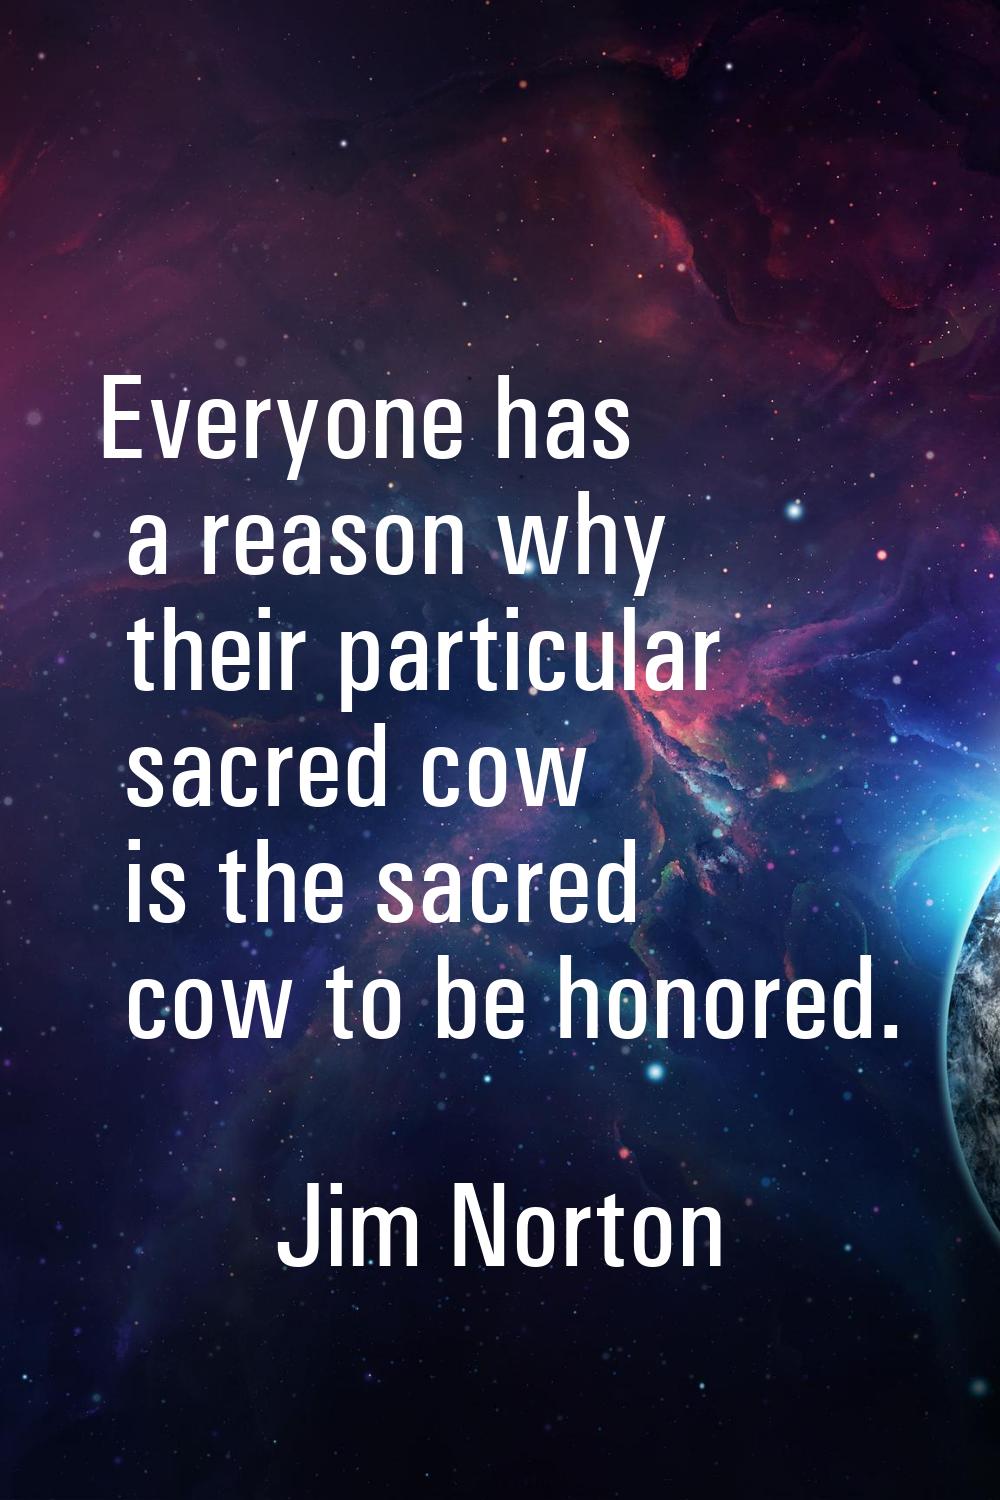 Everyone has a reason why their particular sacred cow is the sacred cow to be honored.